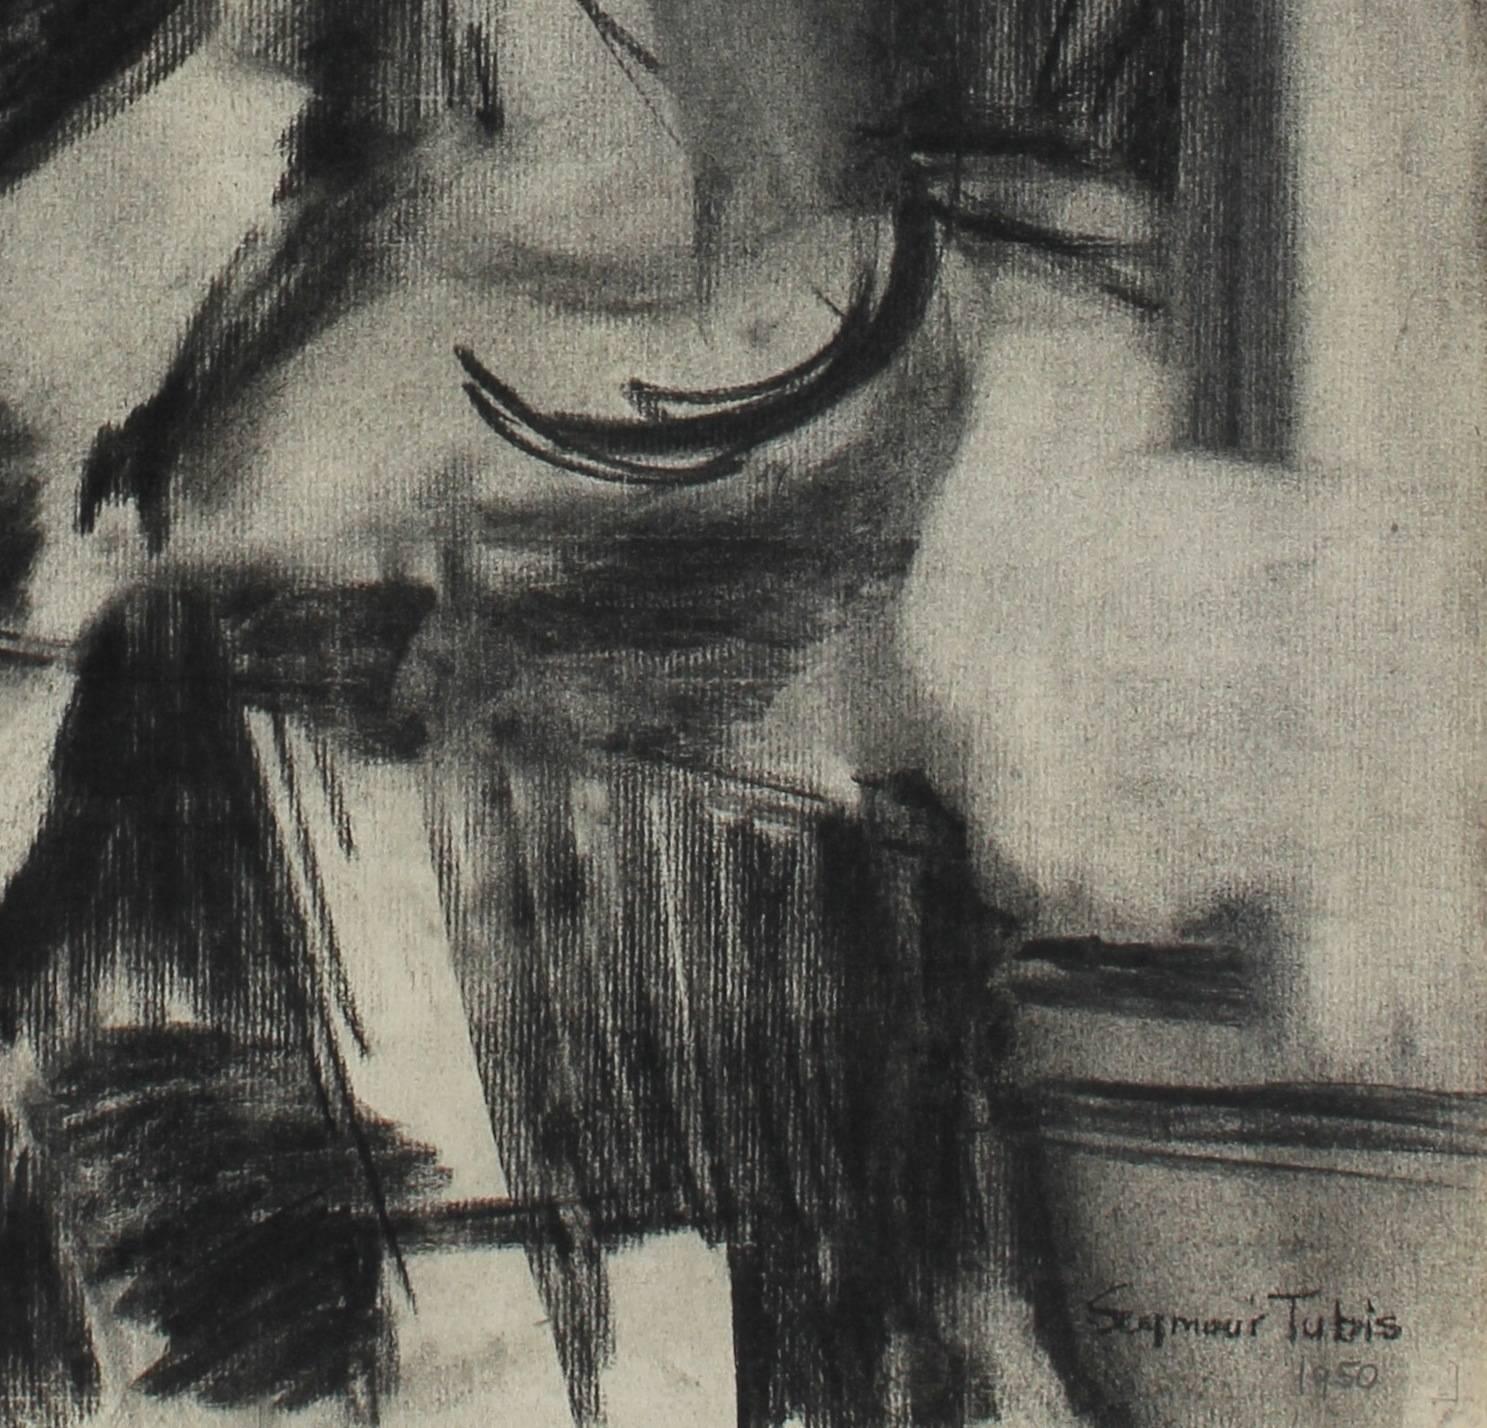 Expressionist Figure Study in Charcoal, 1950 - Art by Seymour Tubis